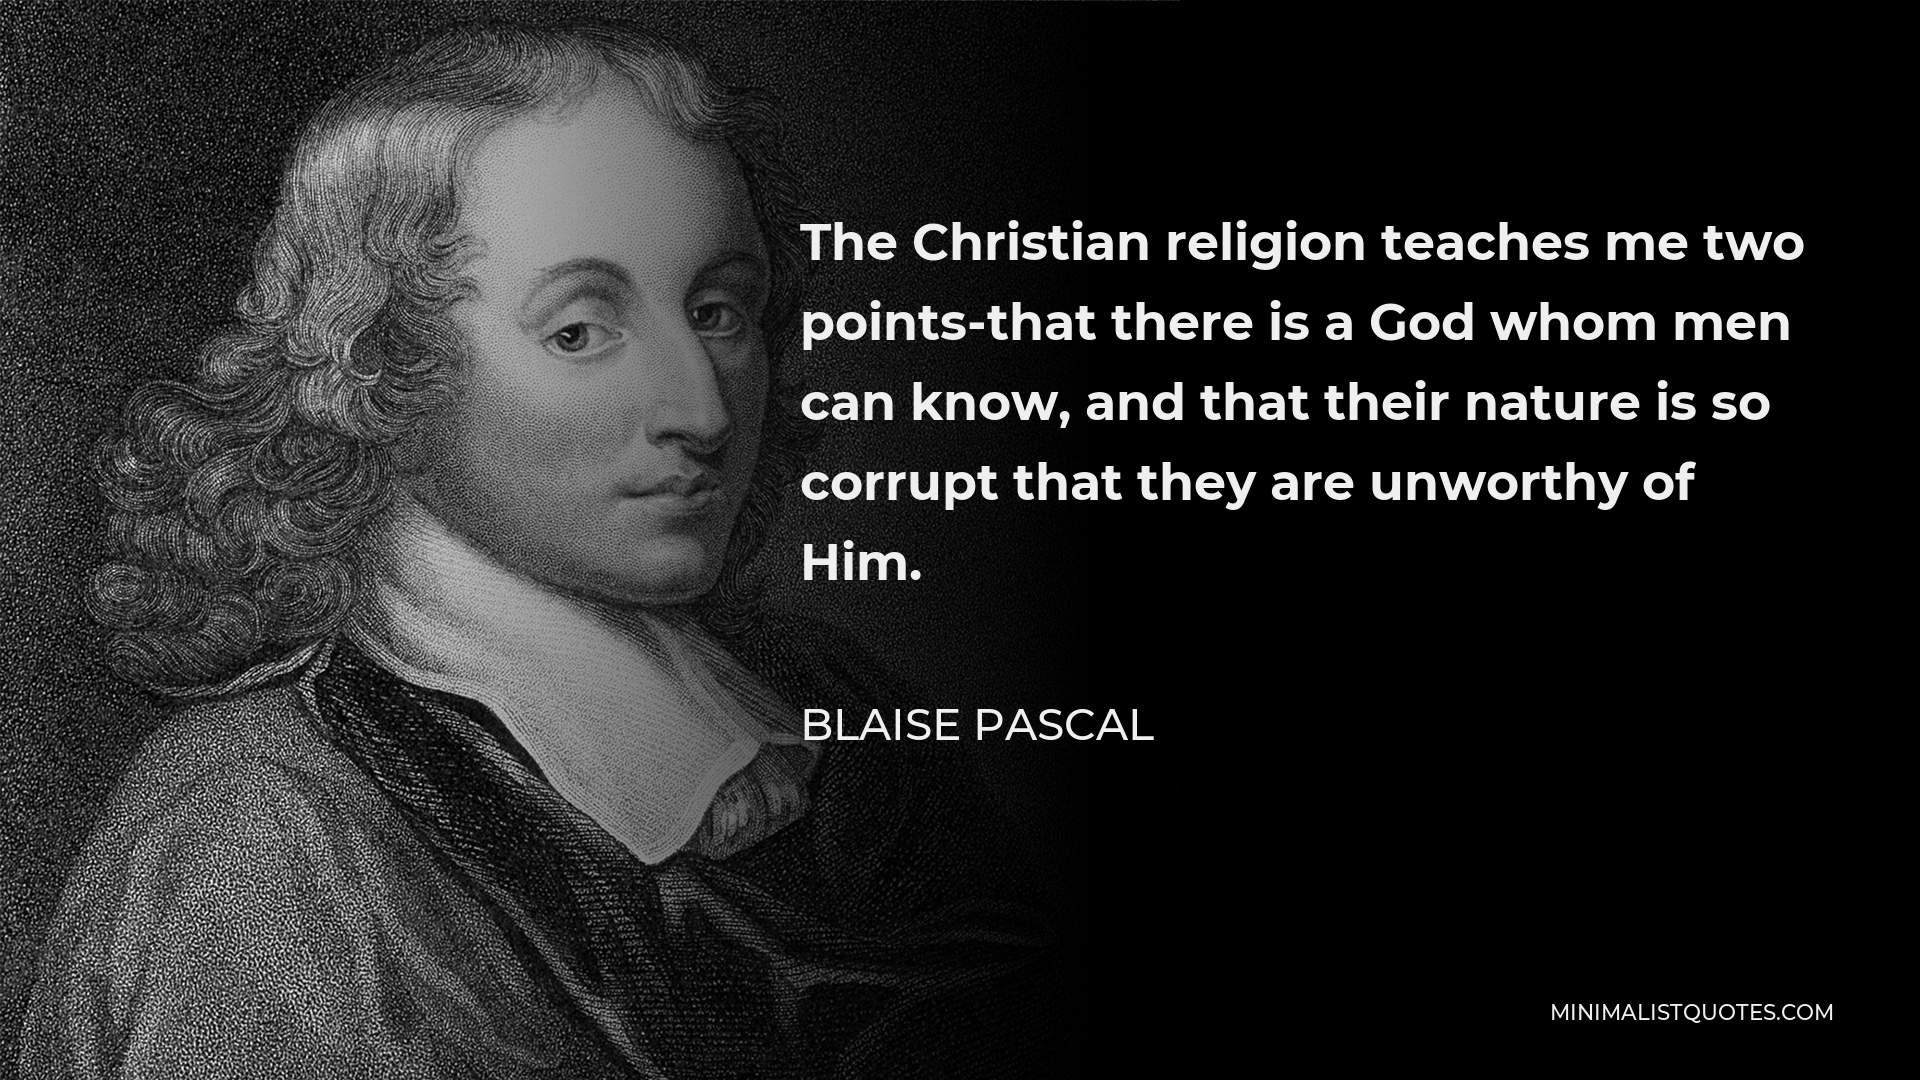 Blaise Pascal Quote - The Christian religion teaches me two points-that there is a God whom men can know, and that their nature is so corrupt that they are unworthy of Him.